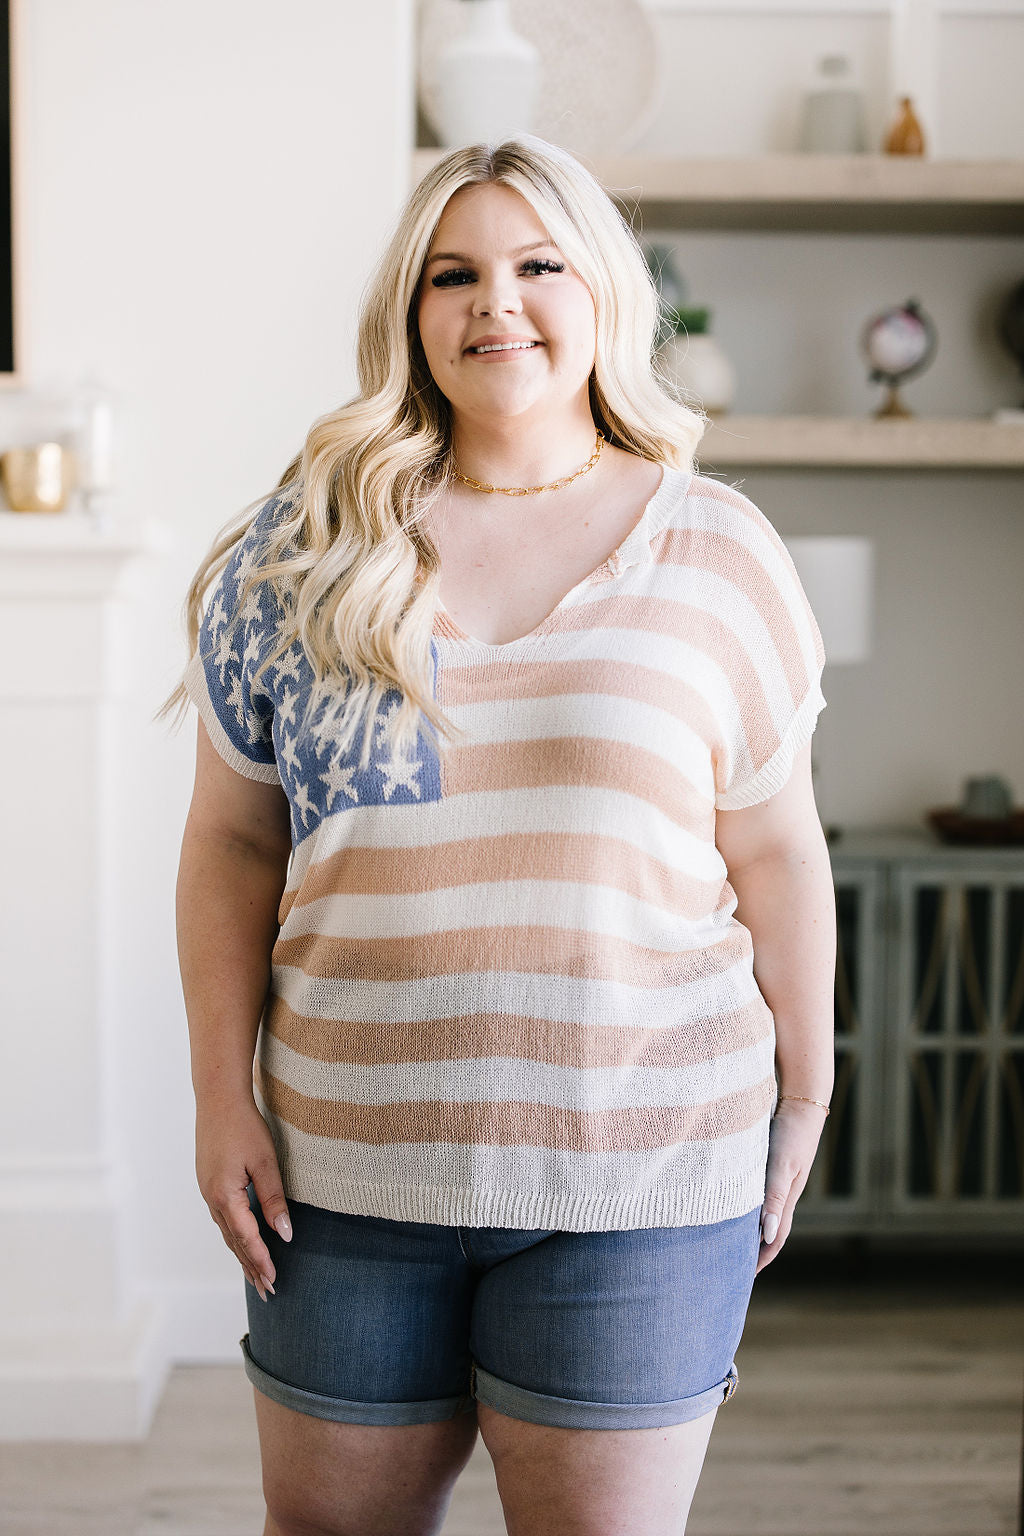 Old Glory Sleeveless Sweater - Southern Divas Boutique